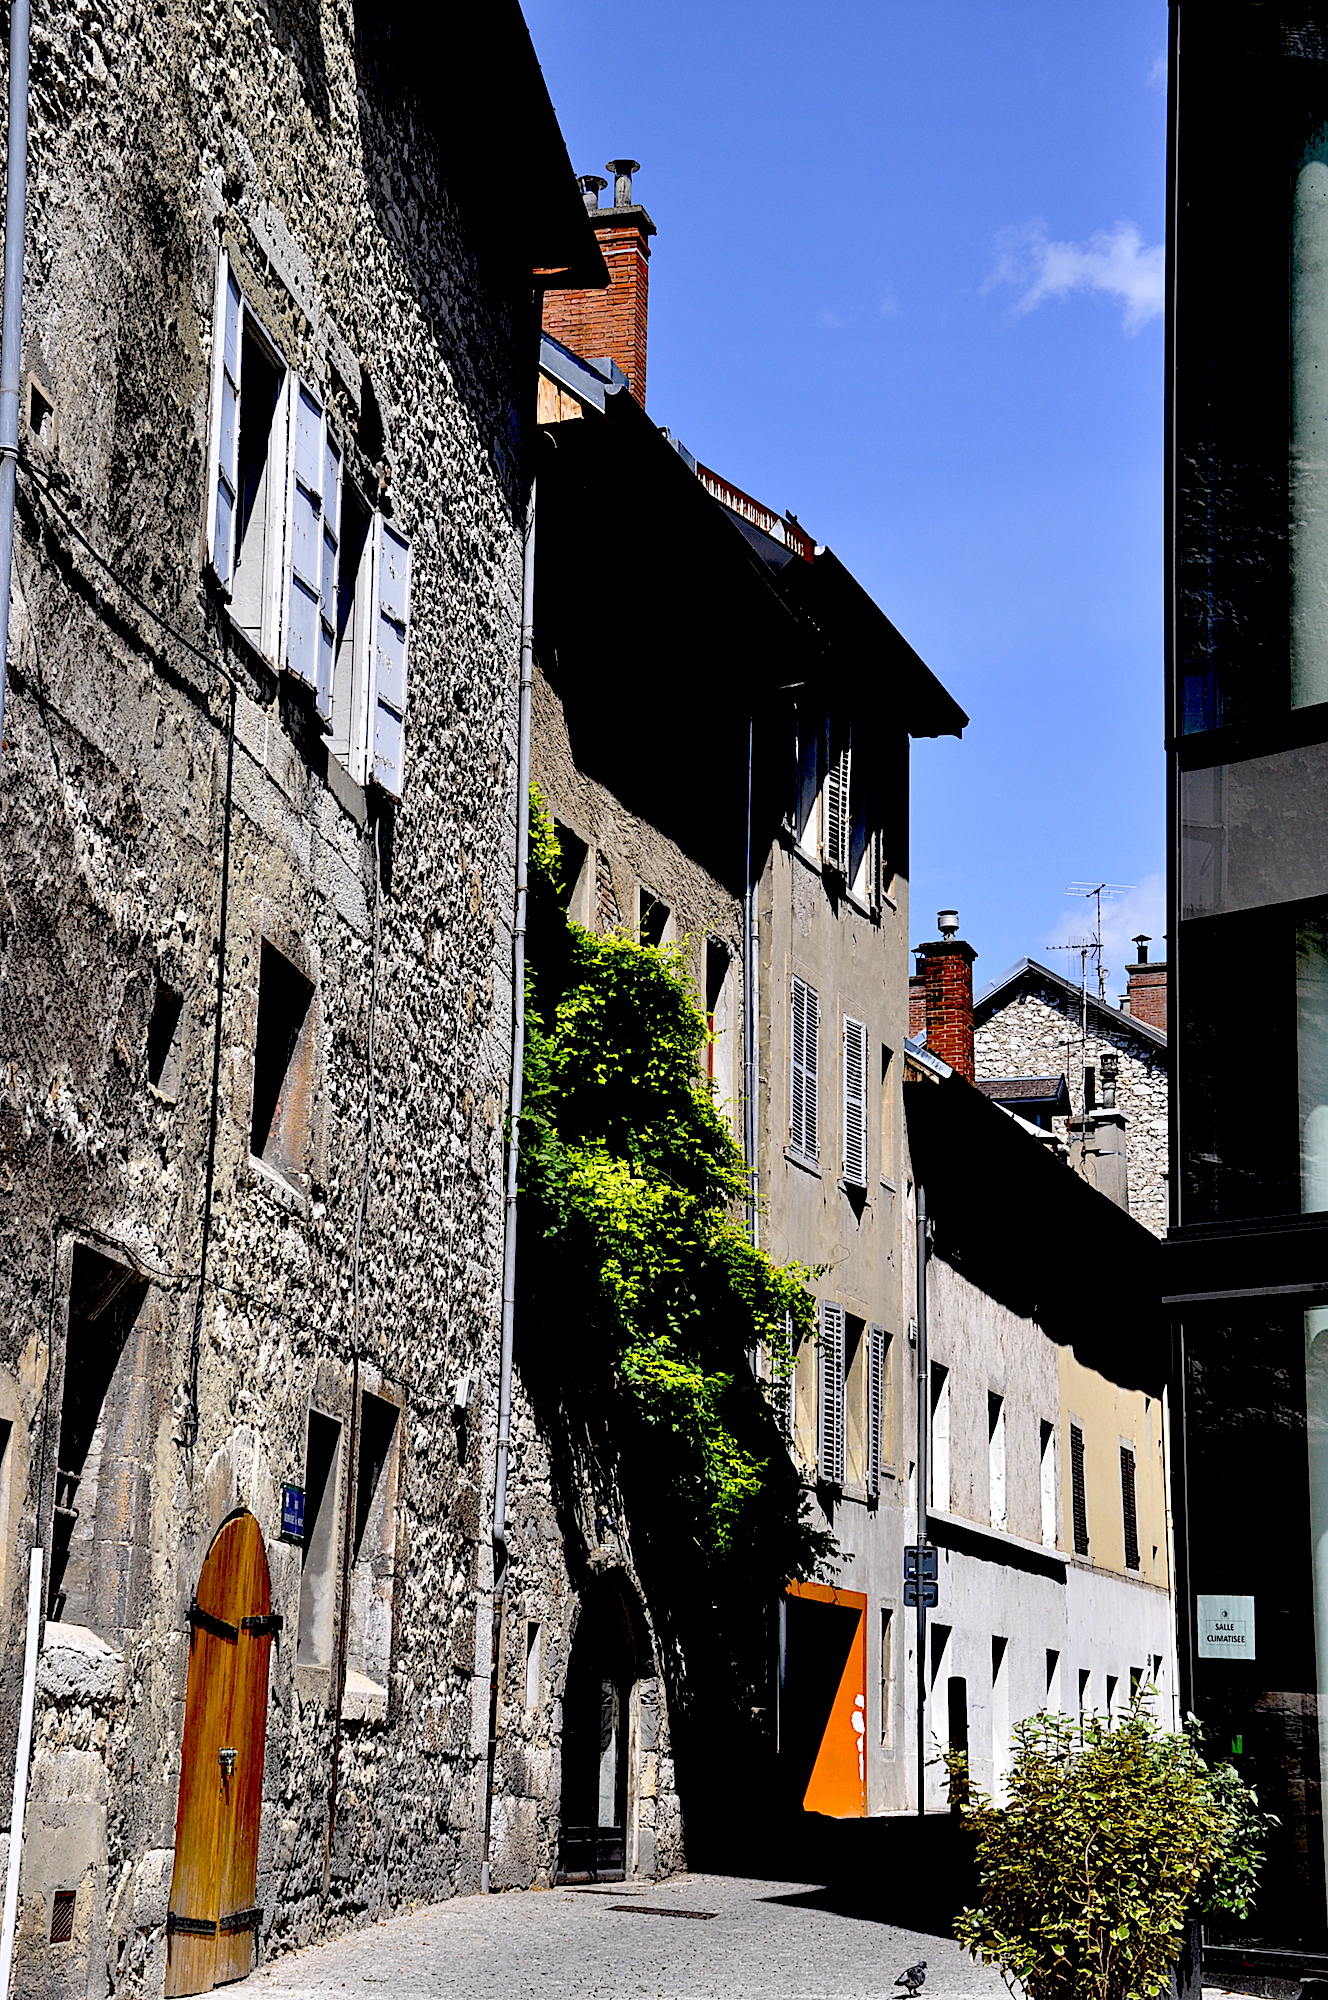 The Italian influence in Chambery is felt in the food and the architecture.